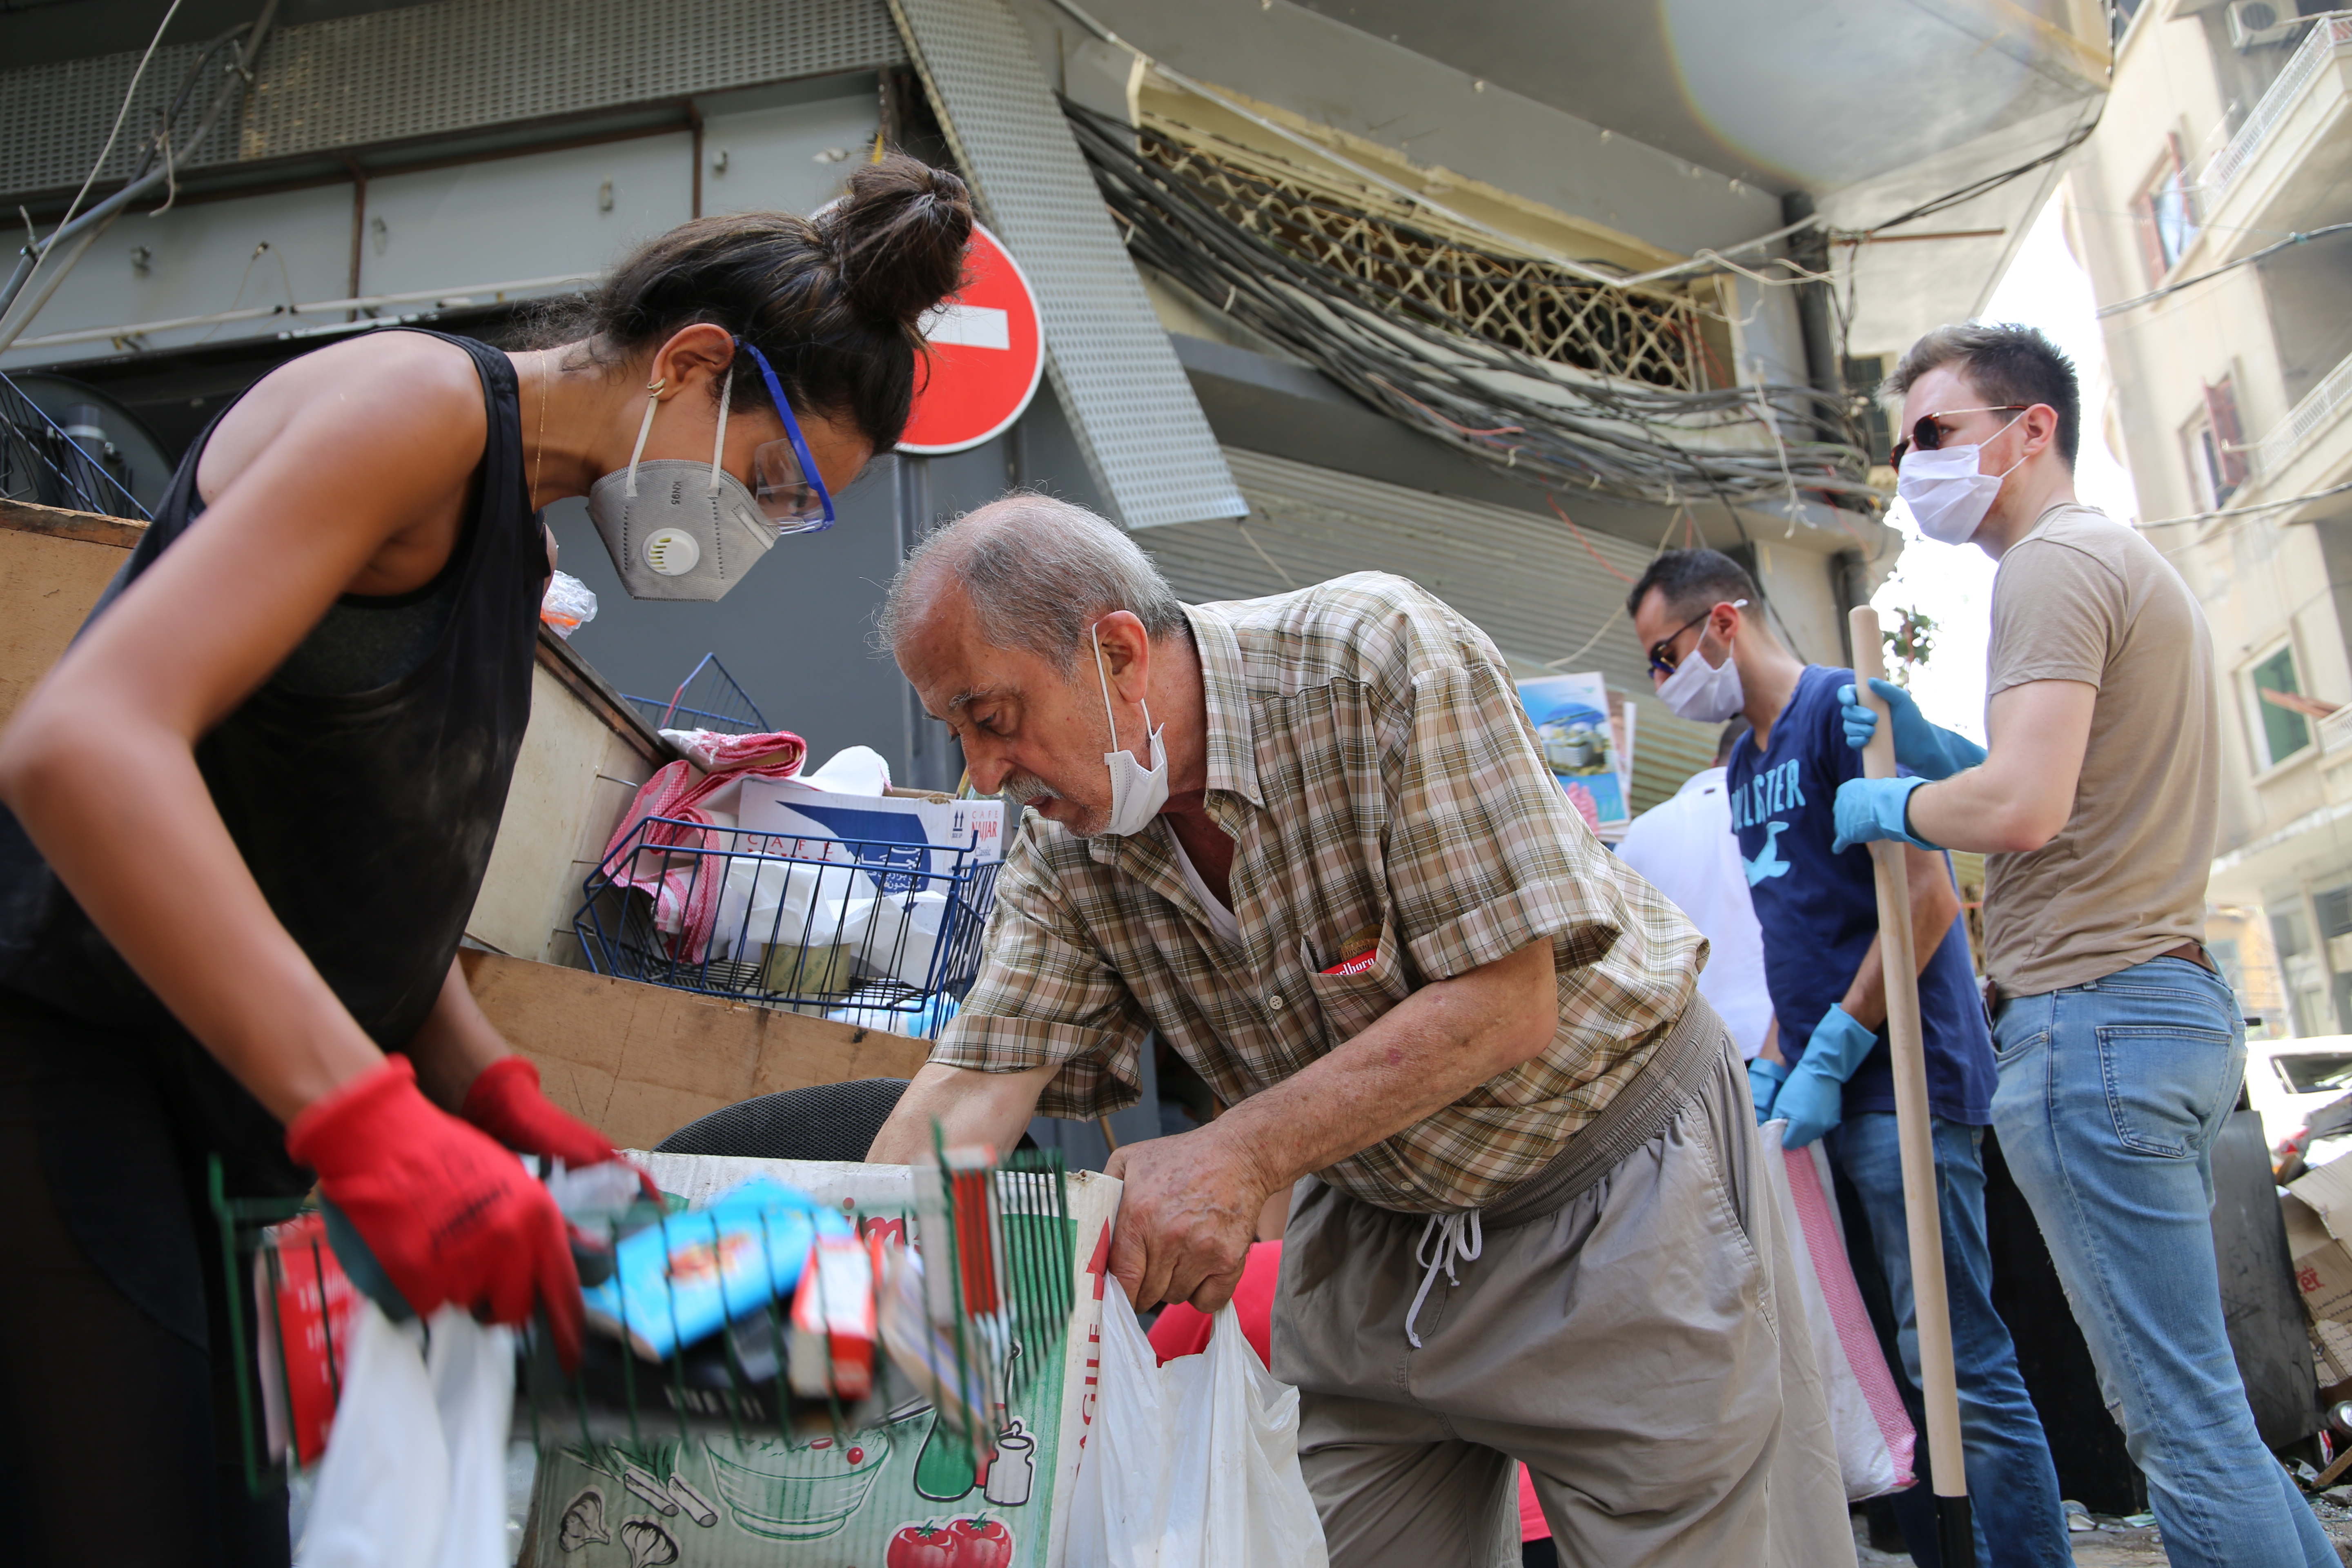 Lebanese volunteers band together to clean up and give aid in Beirut Downtown after the tragic explosion in the Port of Beirut on August 4, 2020.